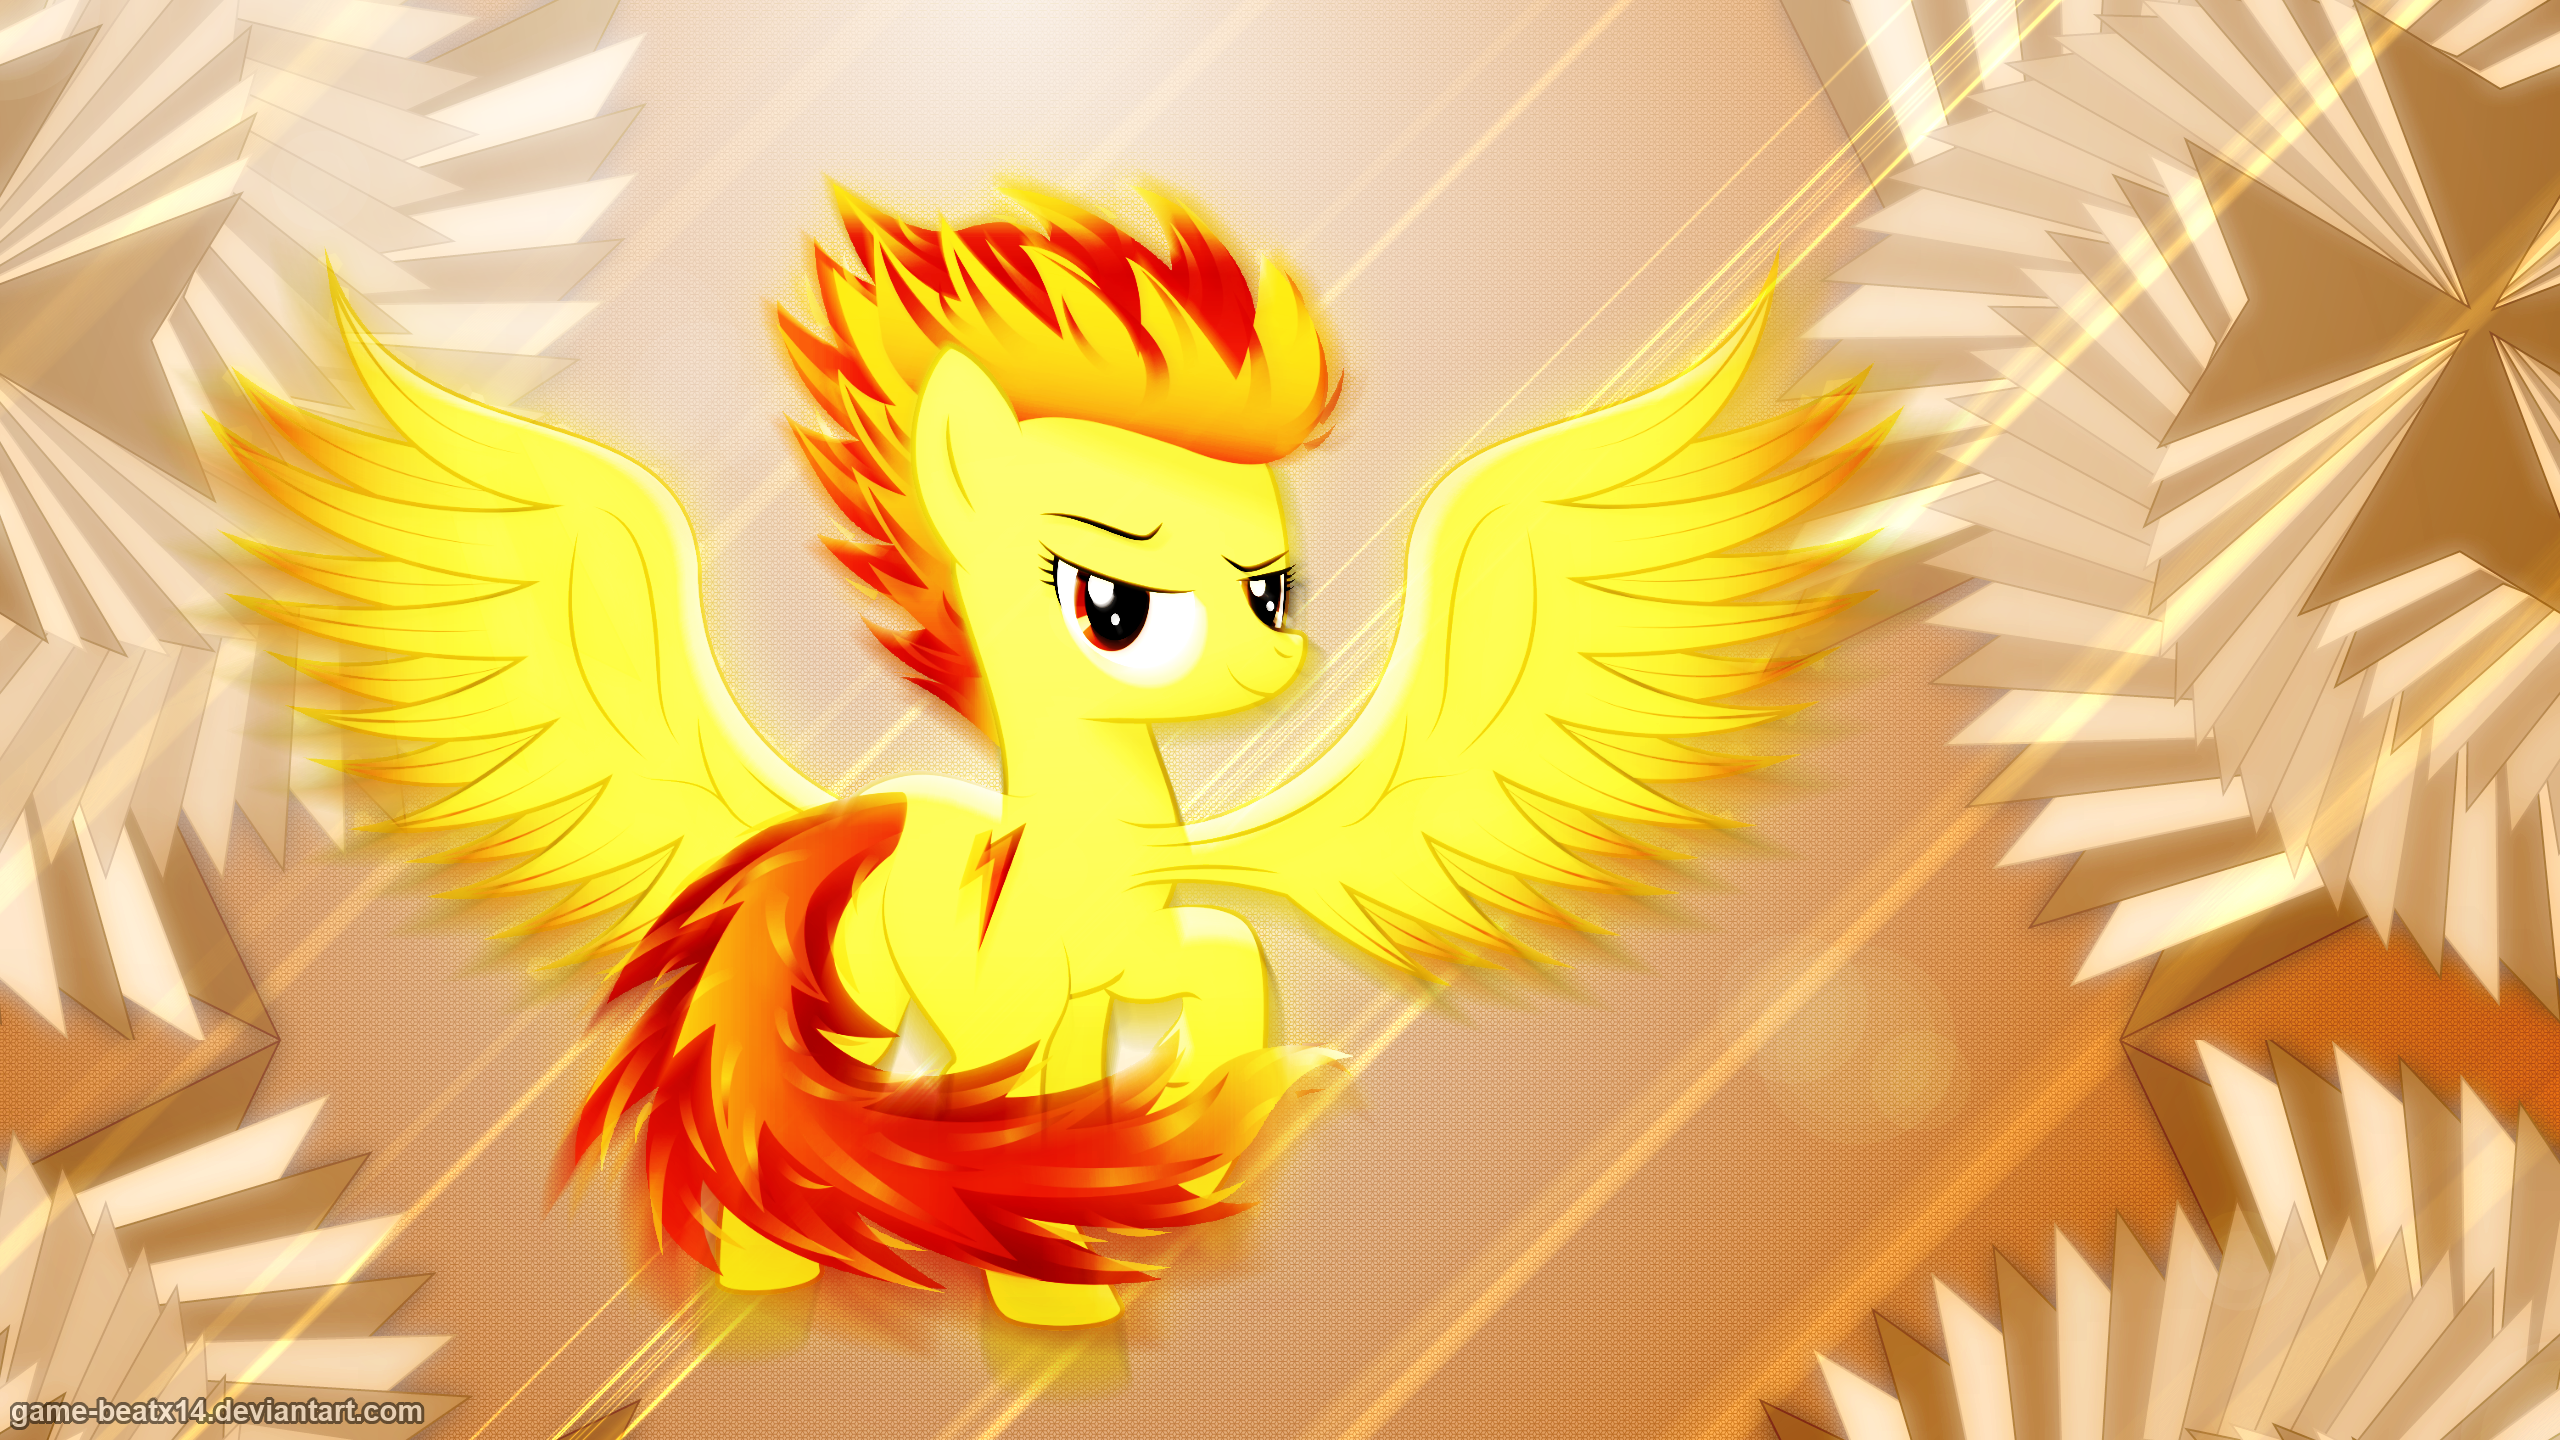 Spitfire Wallpaper 3 by civgod666 and Game-BeatX14